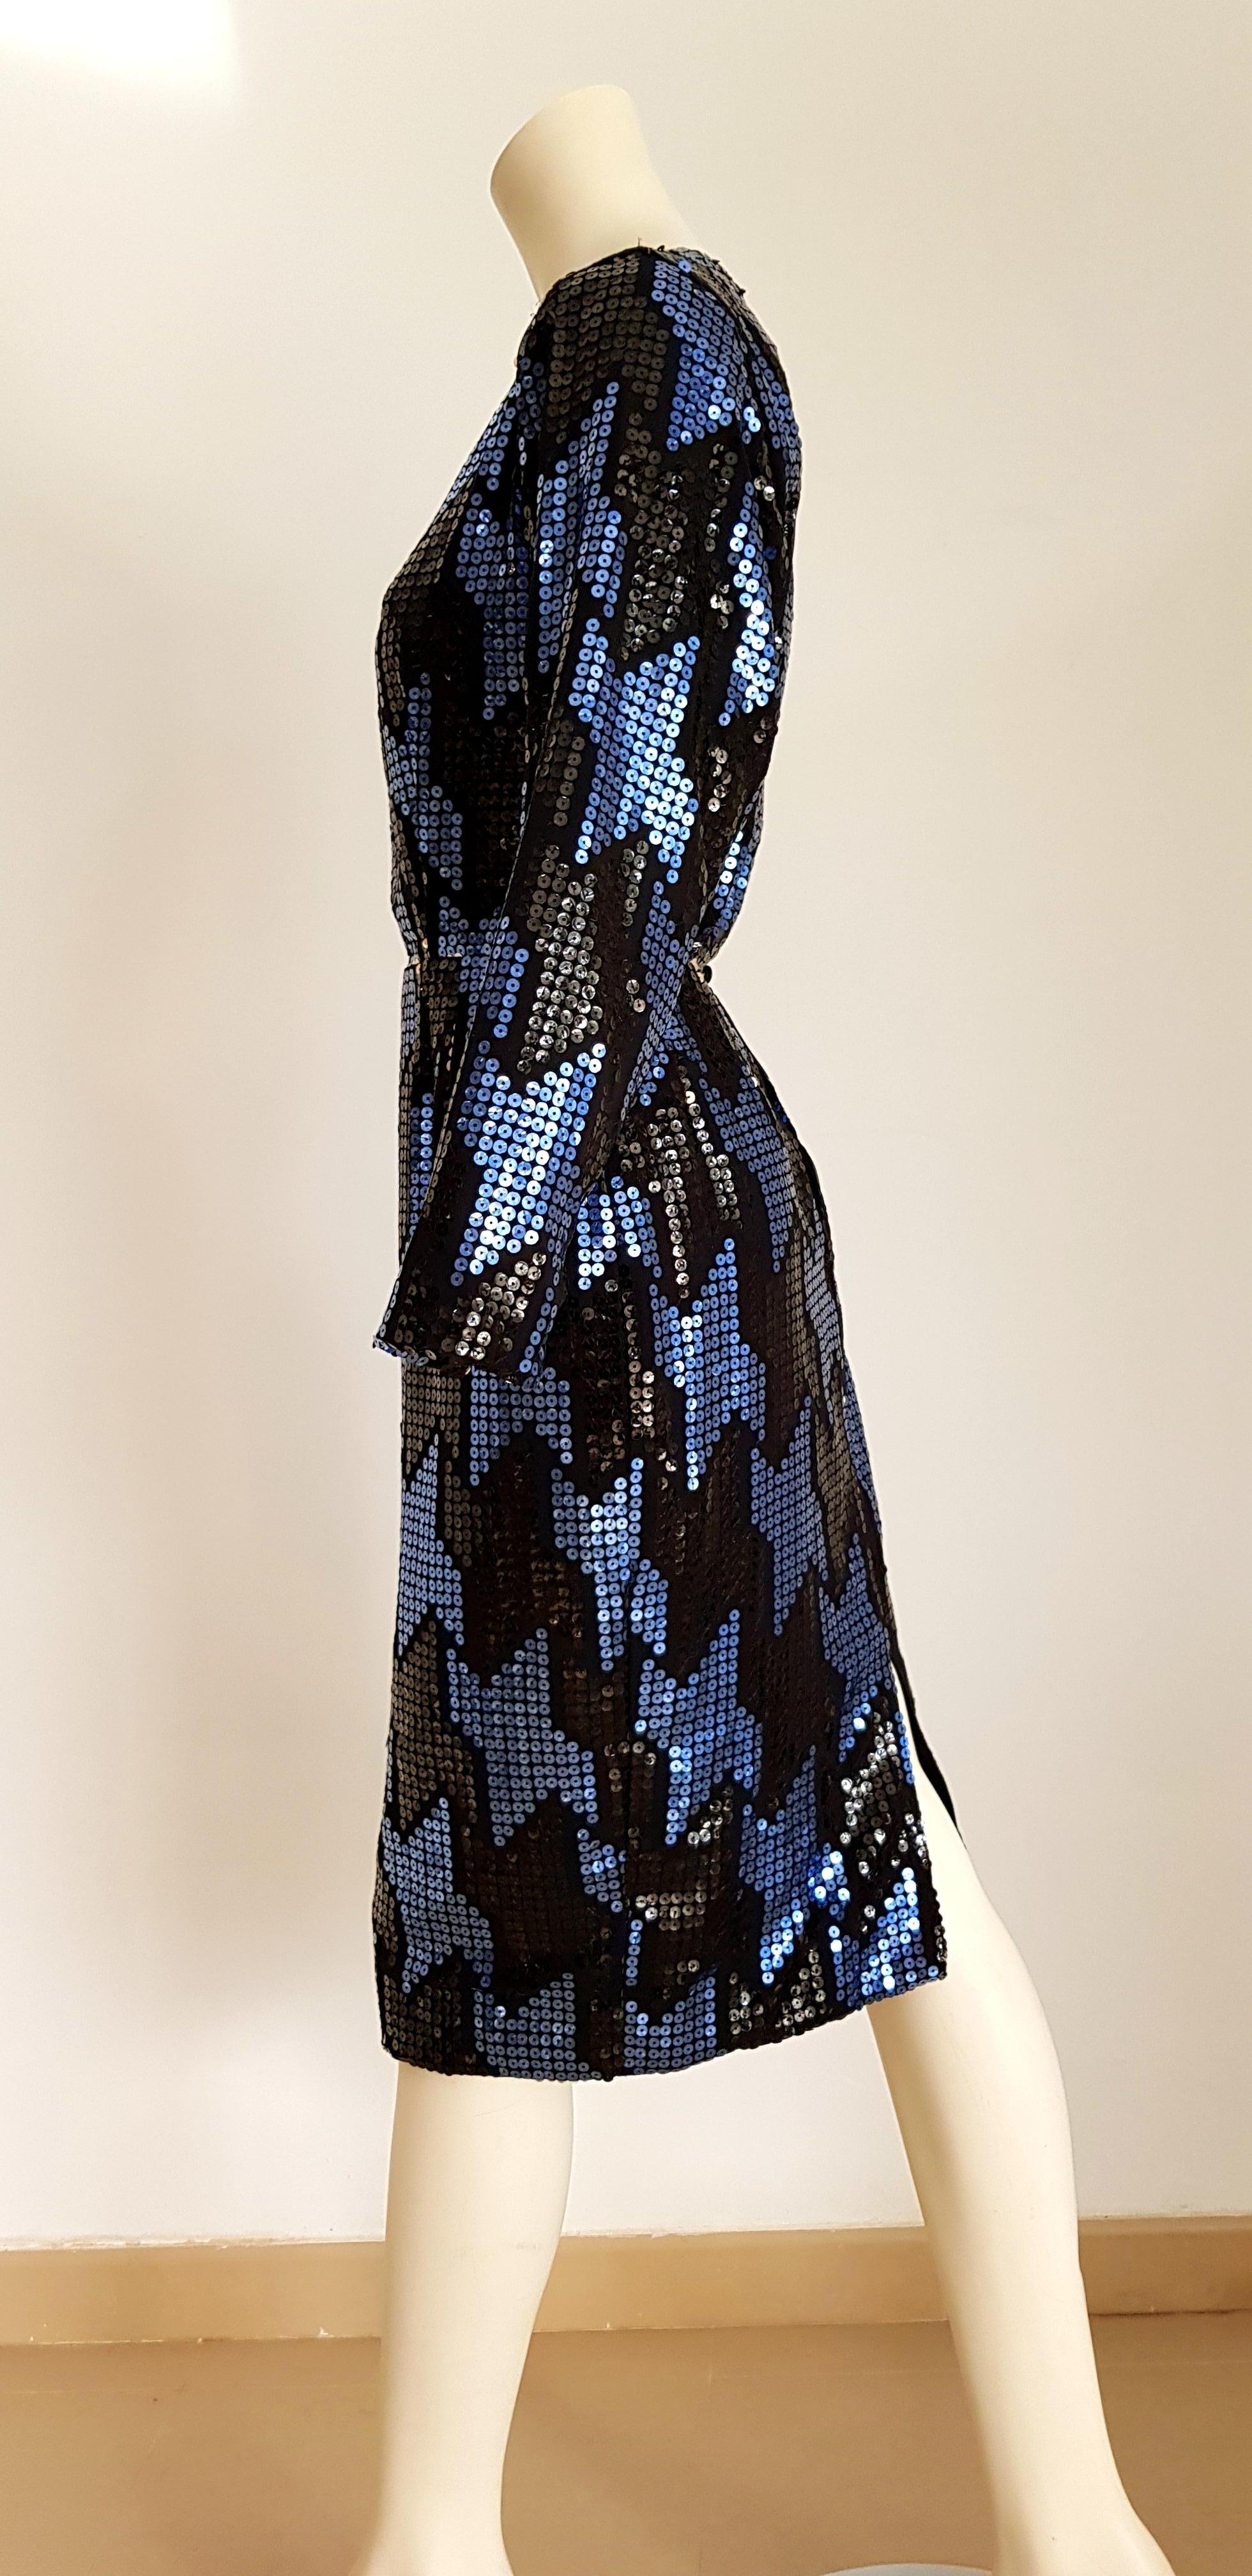 Christian DIOR Haute Couture blue and black sequins couvered, organza silk - Unworn, new

SIZE: equivalent to about Small / Medium, please review approx measurements as follows in cm: lenght 106, chest underarm to underarm 49, bust circumference 88,